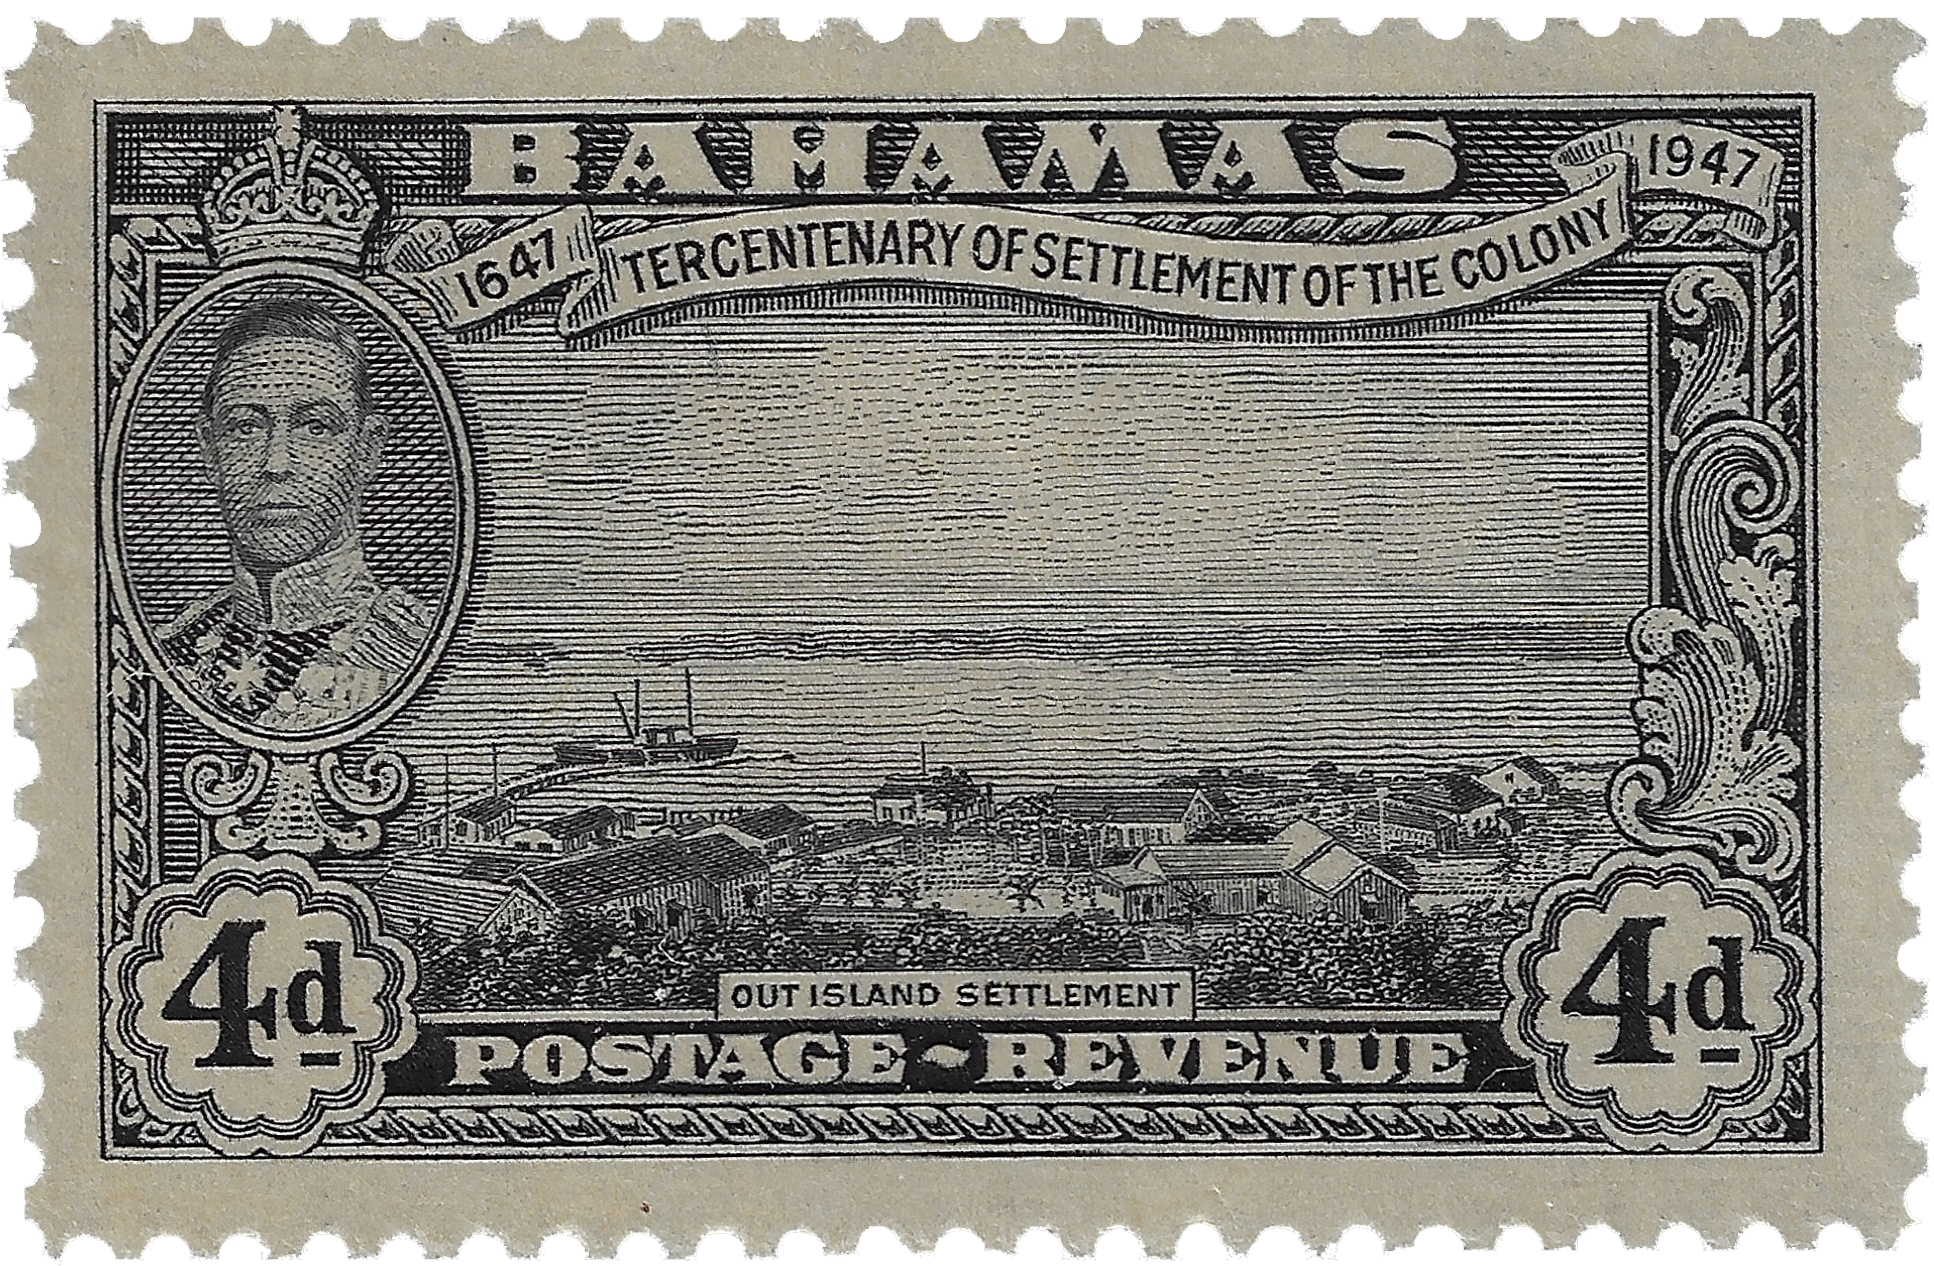 4d 1948, 1647 Tercentenary of Settlement of the Colony, Out Island Settlement